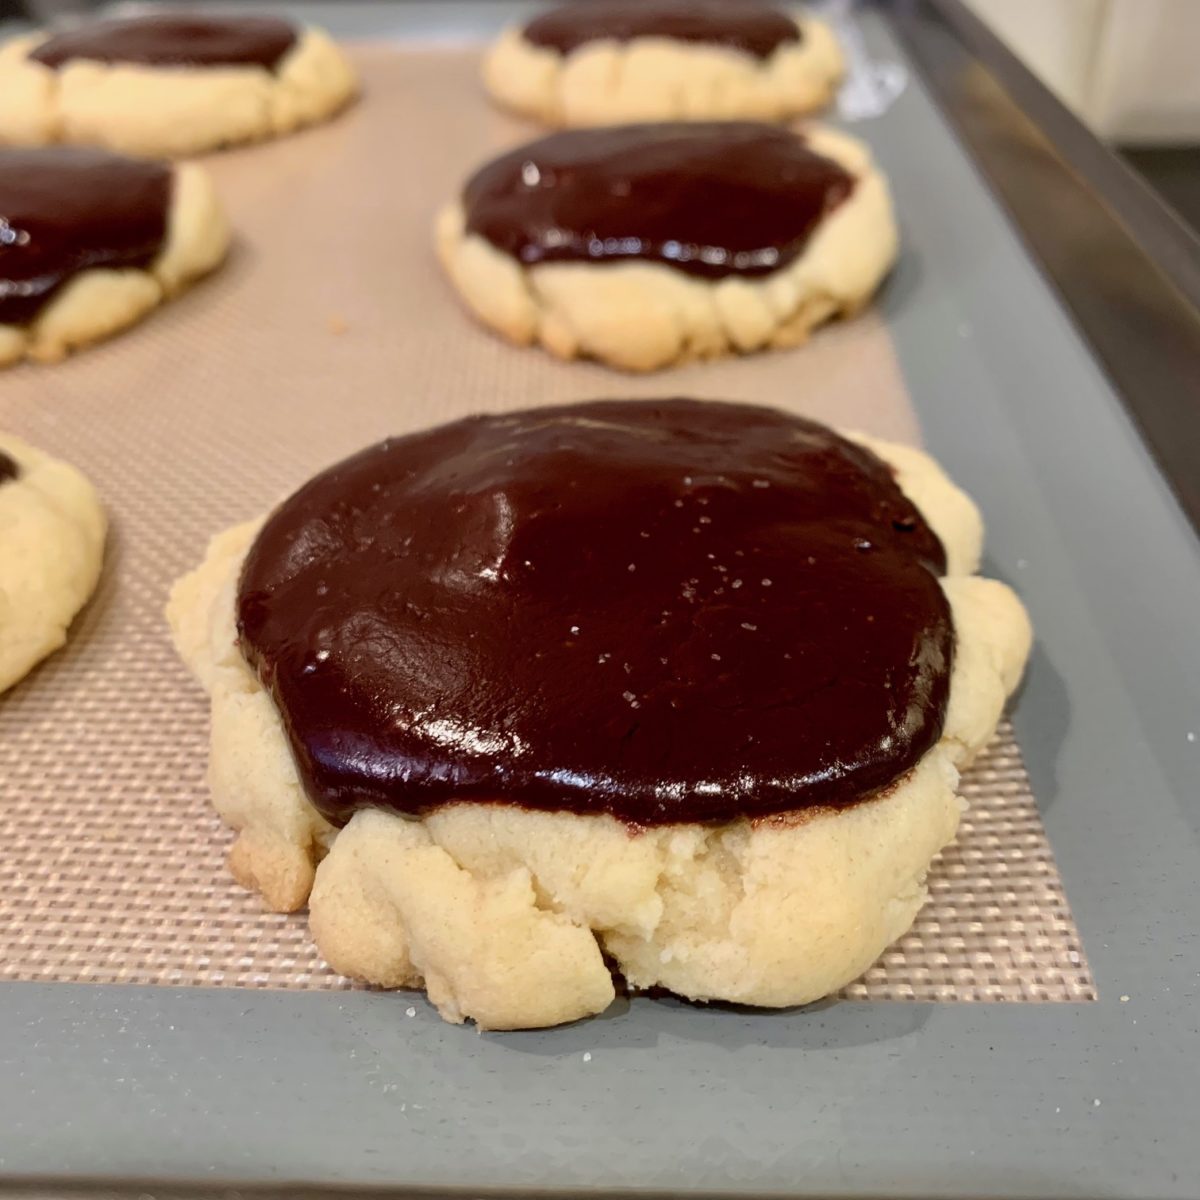 Amy Schumer’s Peanut Butter Cup Cookies